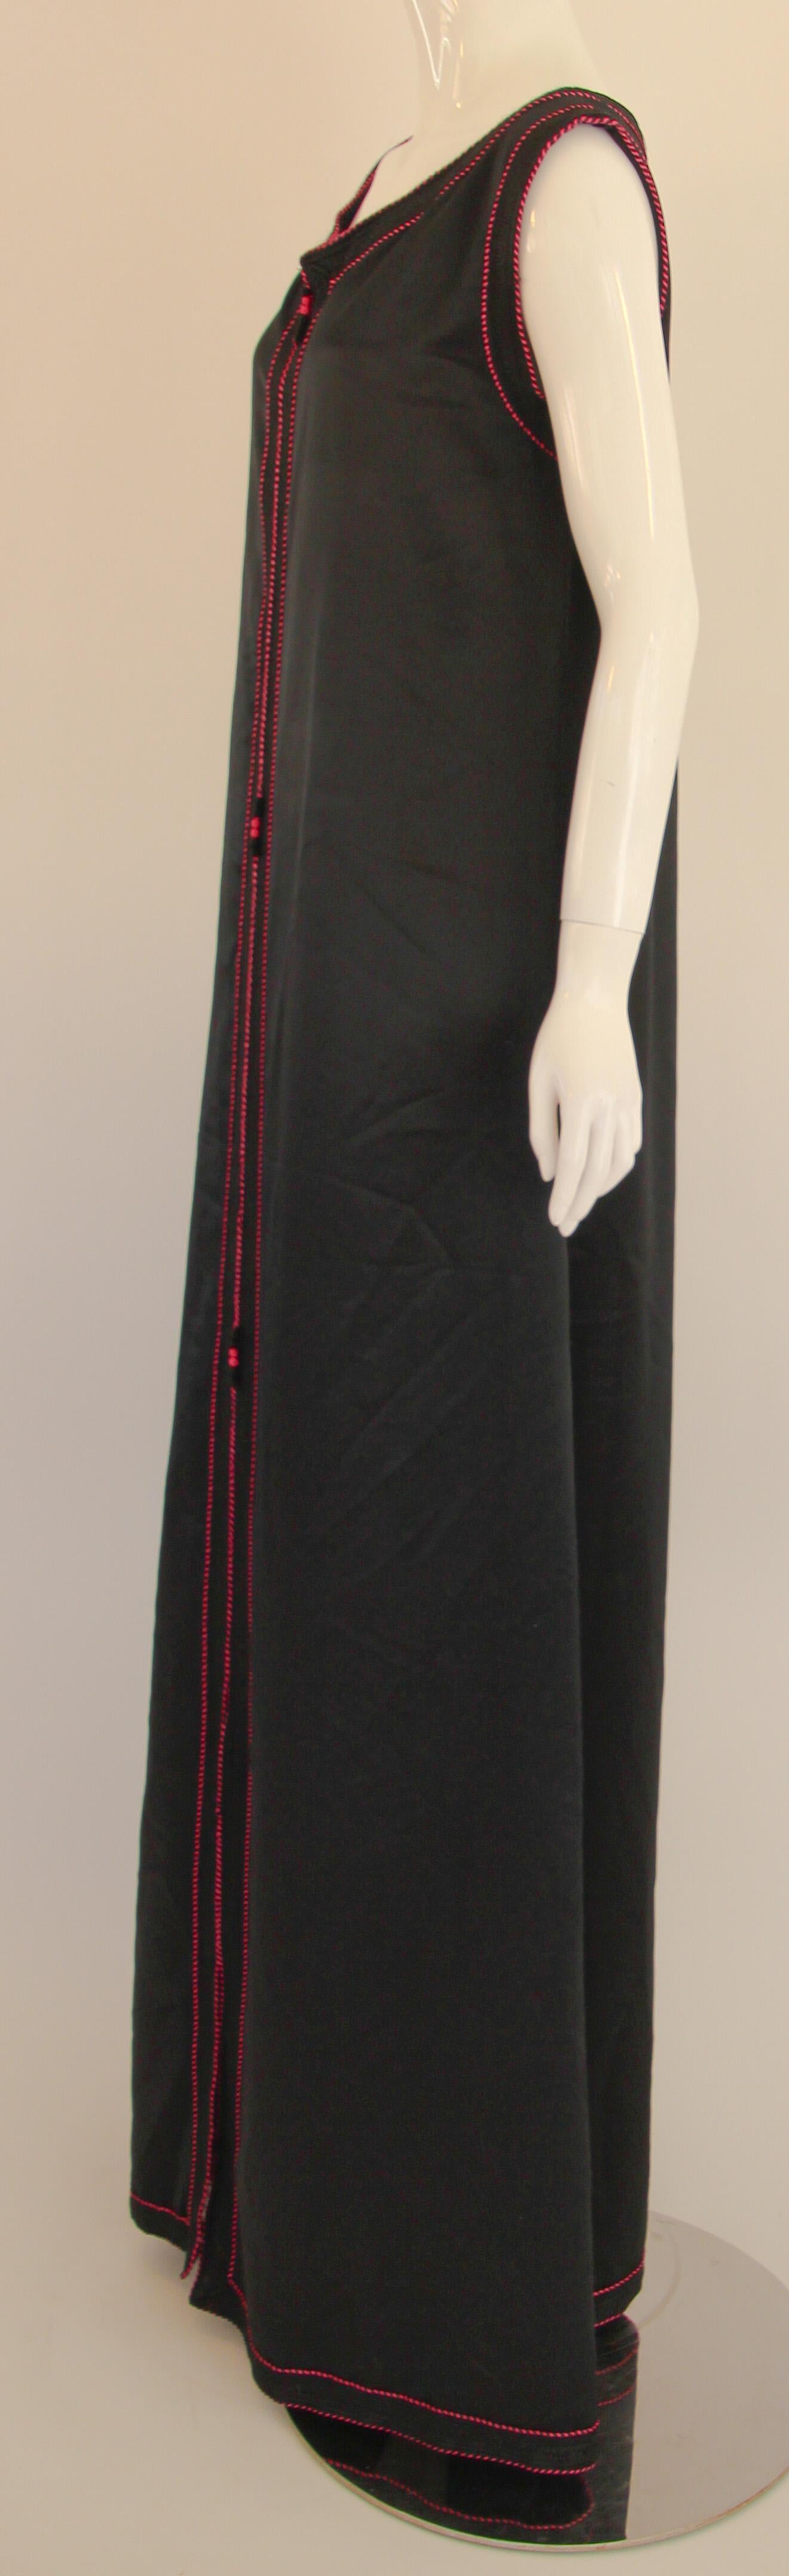 Vintage Caftan Sleeveless Black with Pink Embroidered, ca. 1980s For Sale 6